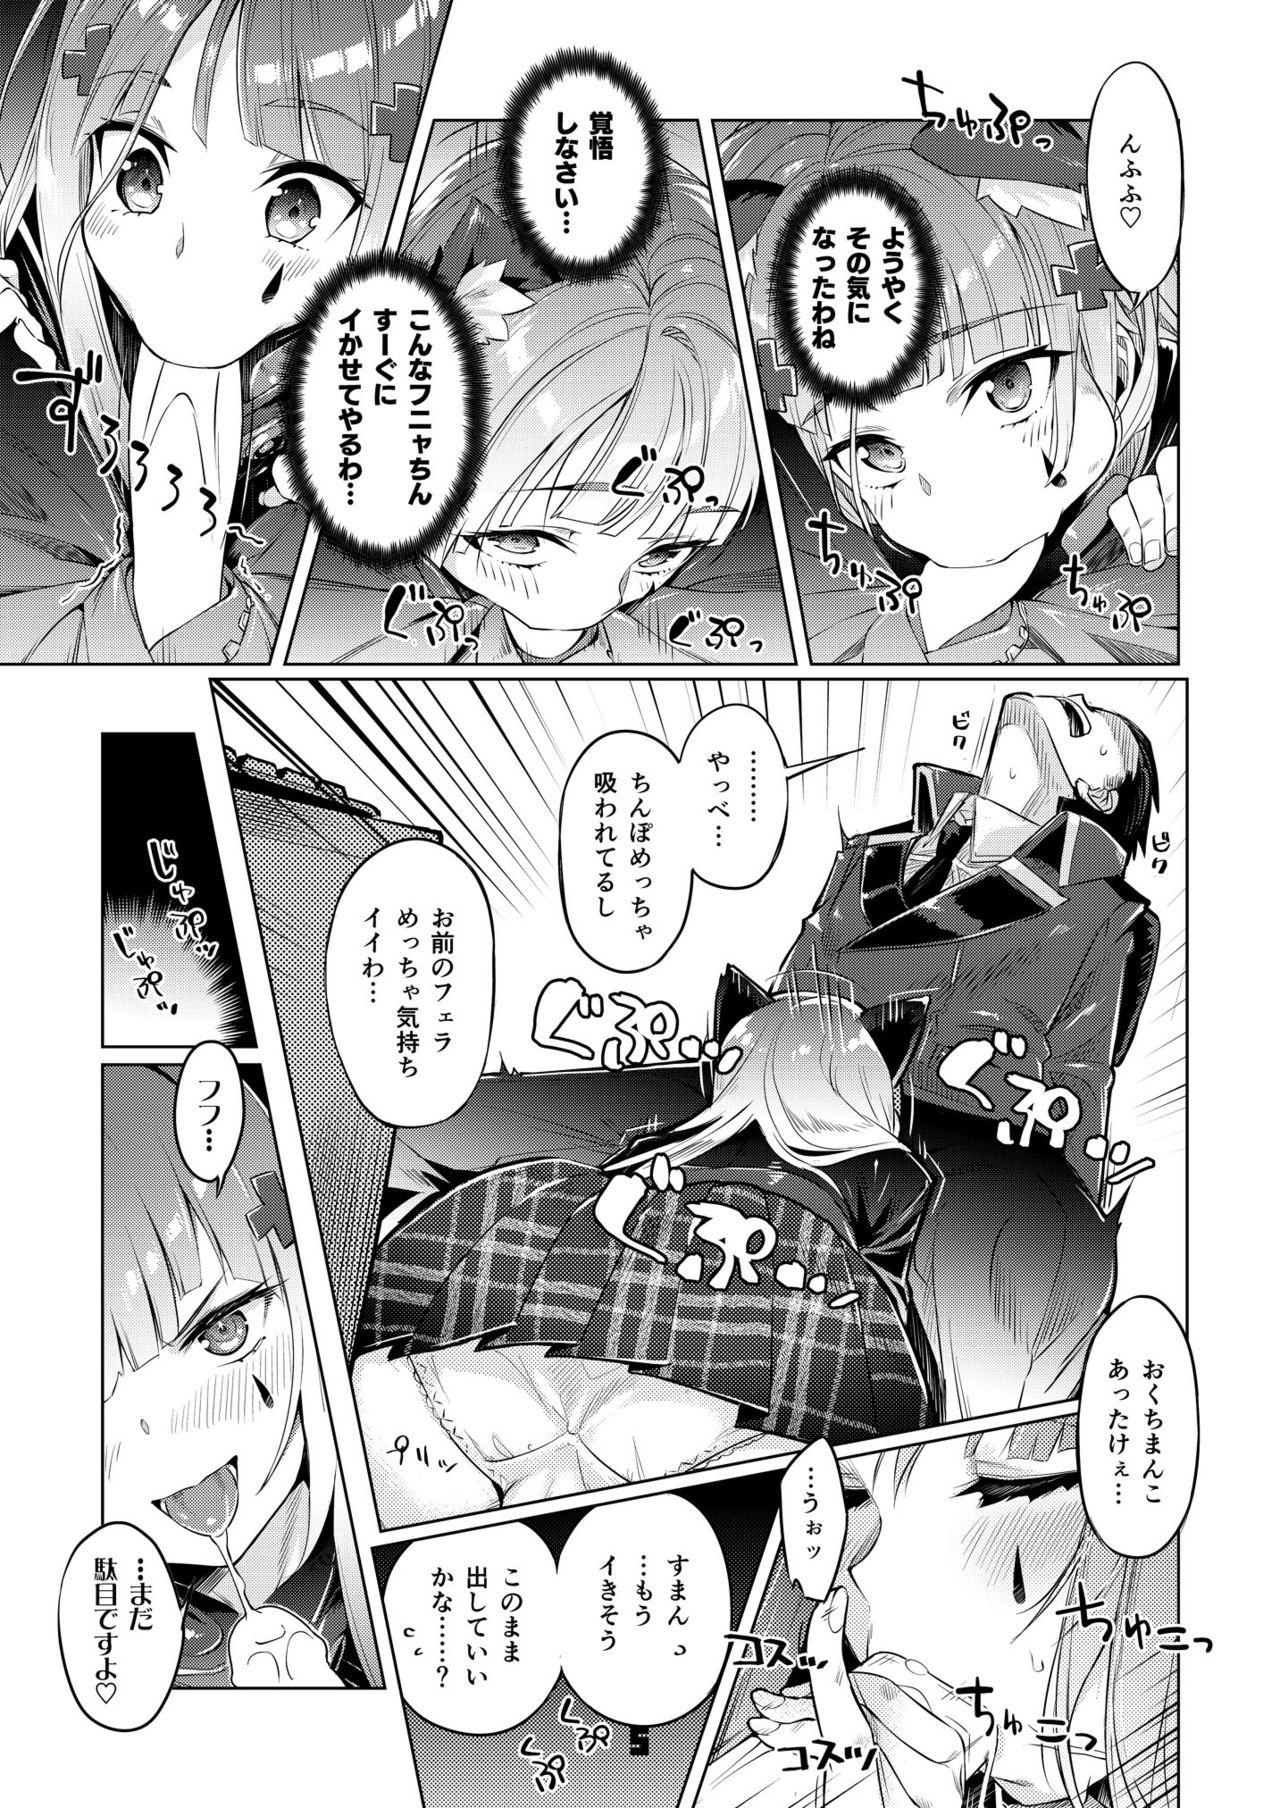 Roleplay Nekomimi Attachment - Girls frontline Party - Page 5